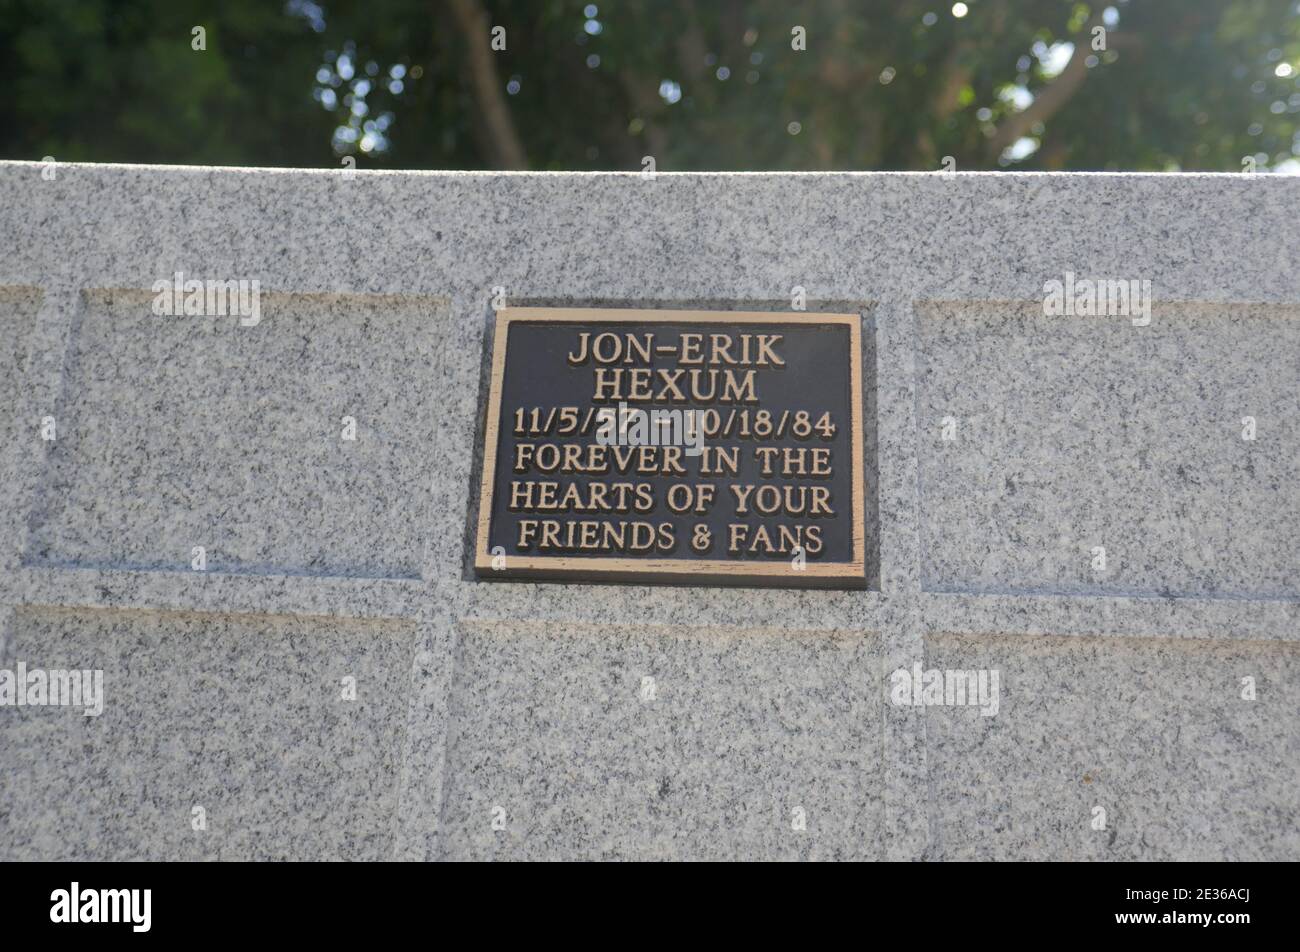 North Hollywood, California, USA 15th January 2021 A general view of atmosphere of Jon-Erik Hexum's Cenotaph and Memorial on January 15, 2021 at Valhalla Memorial Park in North Hollywood, California, USA. Photo by Barry King/Alamy Stock Photo Stock Photo